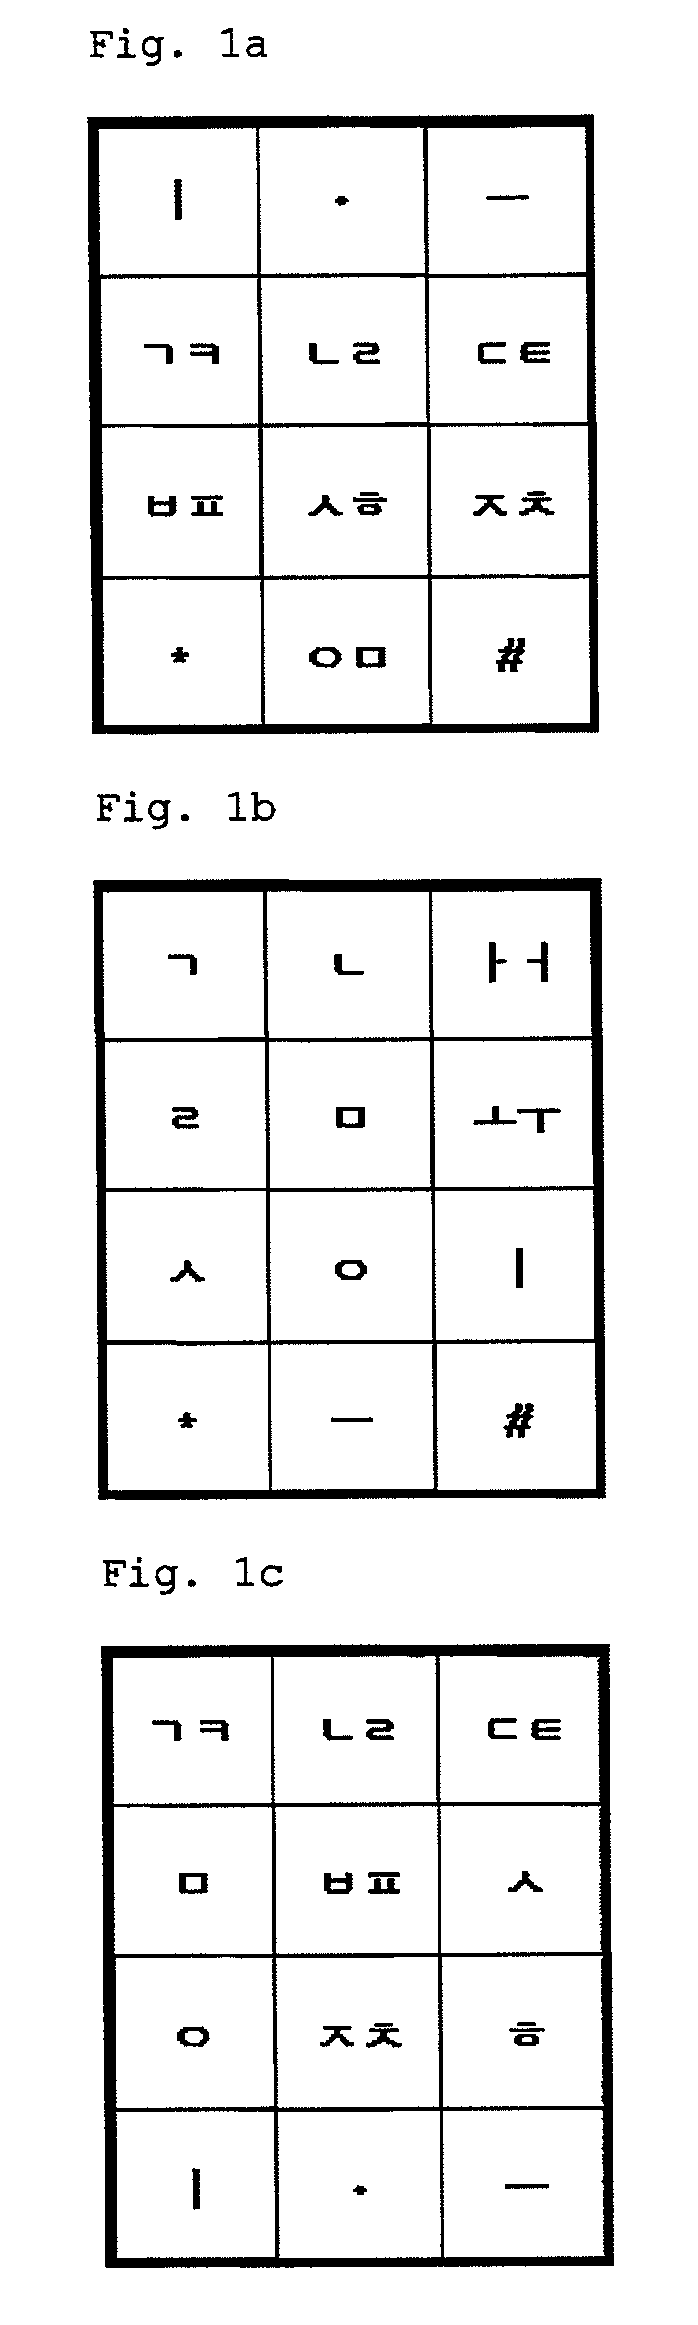 Apparatus and Method for Expressing Hangul